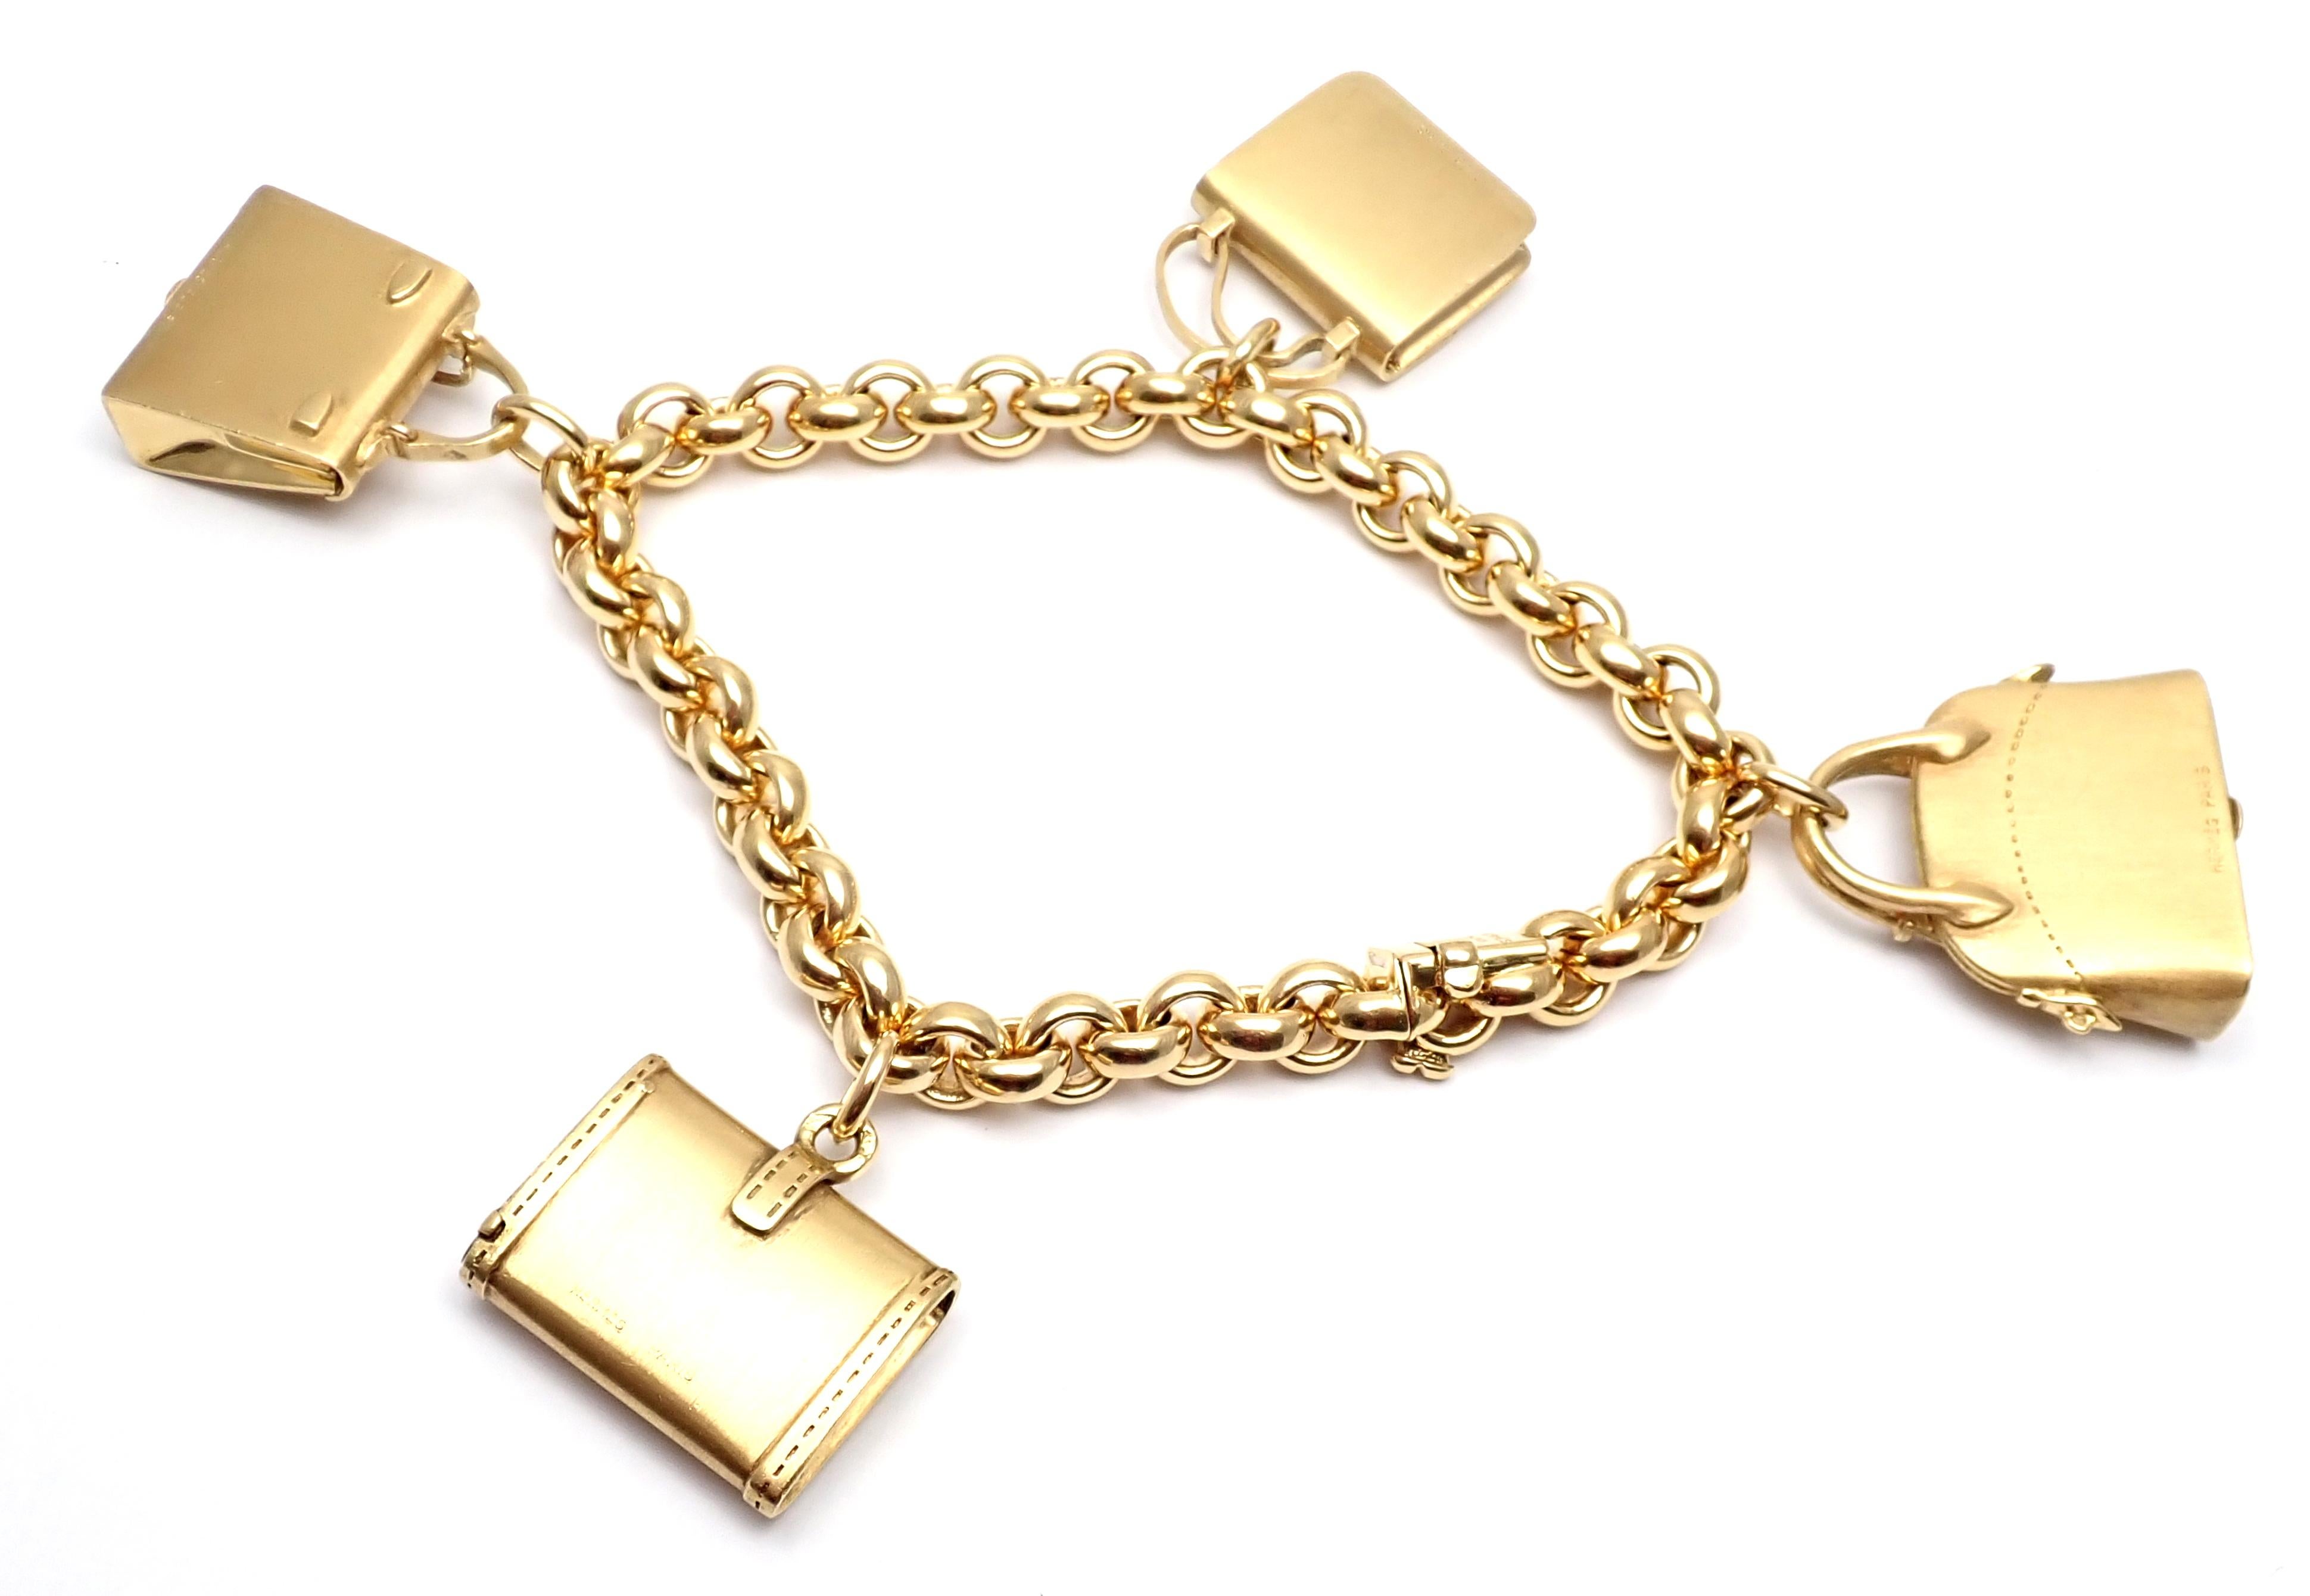 18k Yellow Gold 4 Hanging Bag Charm Link Bracelet by Hermes. 
Includes a total of 4 Hermes bag charms: 
With Constance bag 23mm x 18.5mm
Clutch bag 24mm x 19mm
Kelly bag 20mm x 22mm
Bolide bag 26mm x 24mm
Details: 
Weight: 89.6grams 
Length: 7.25